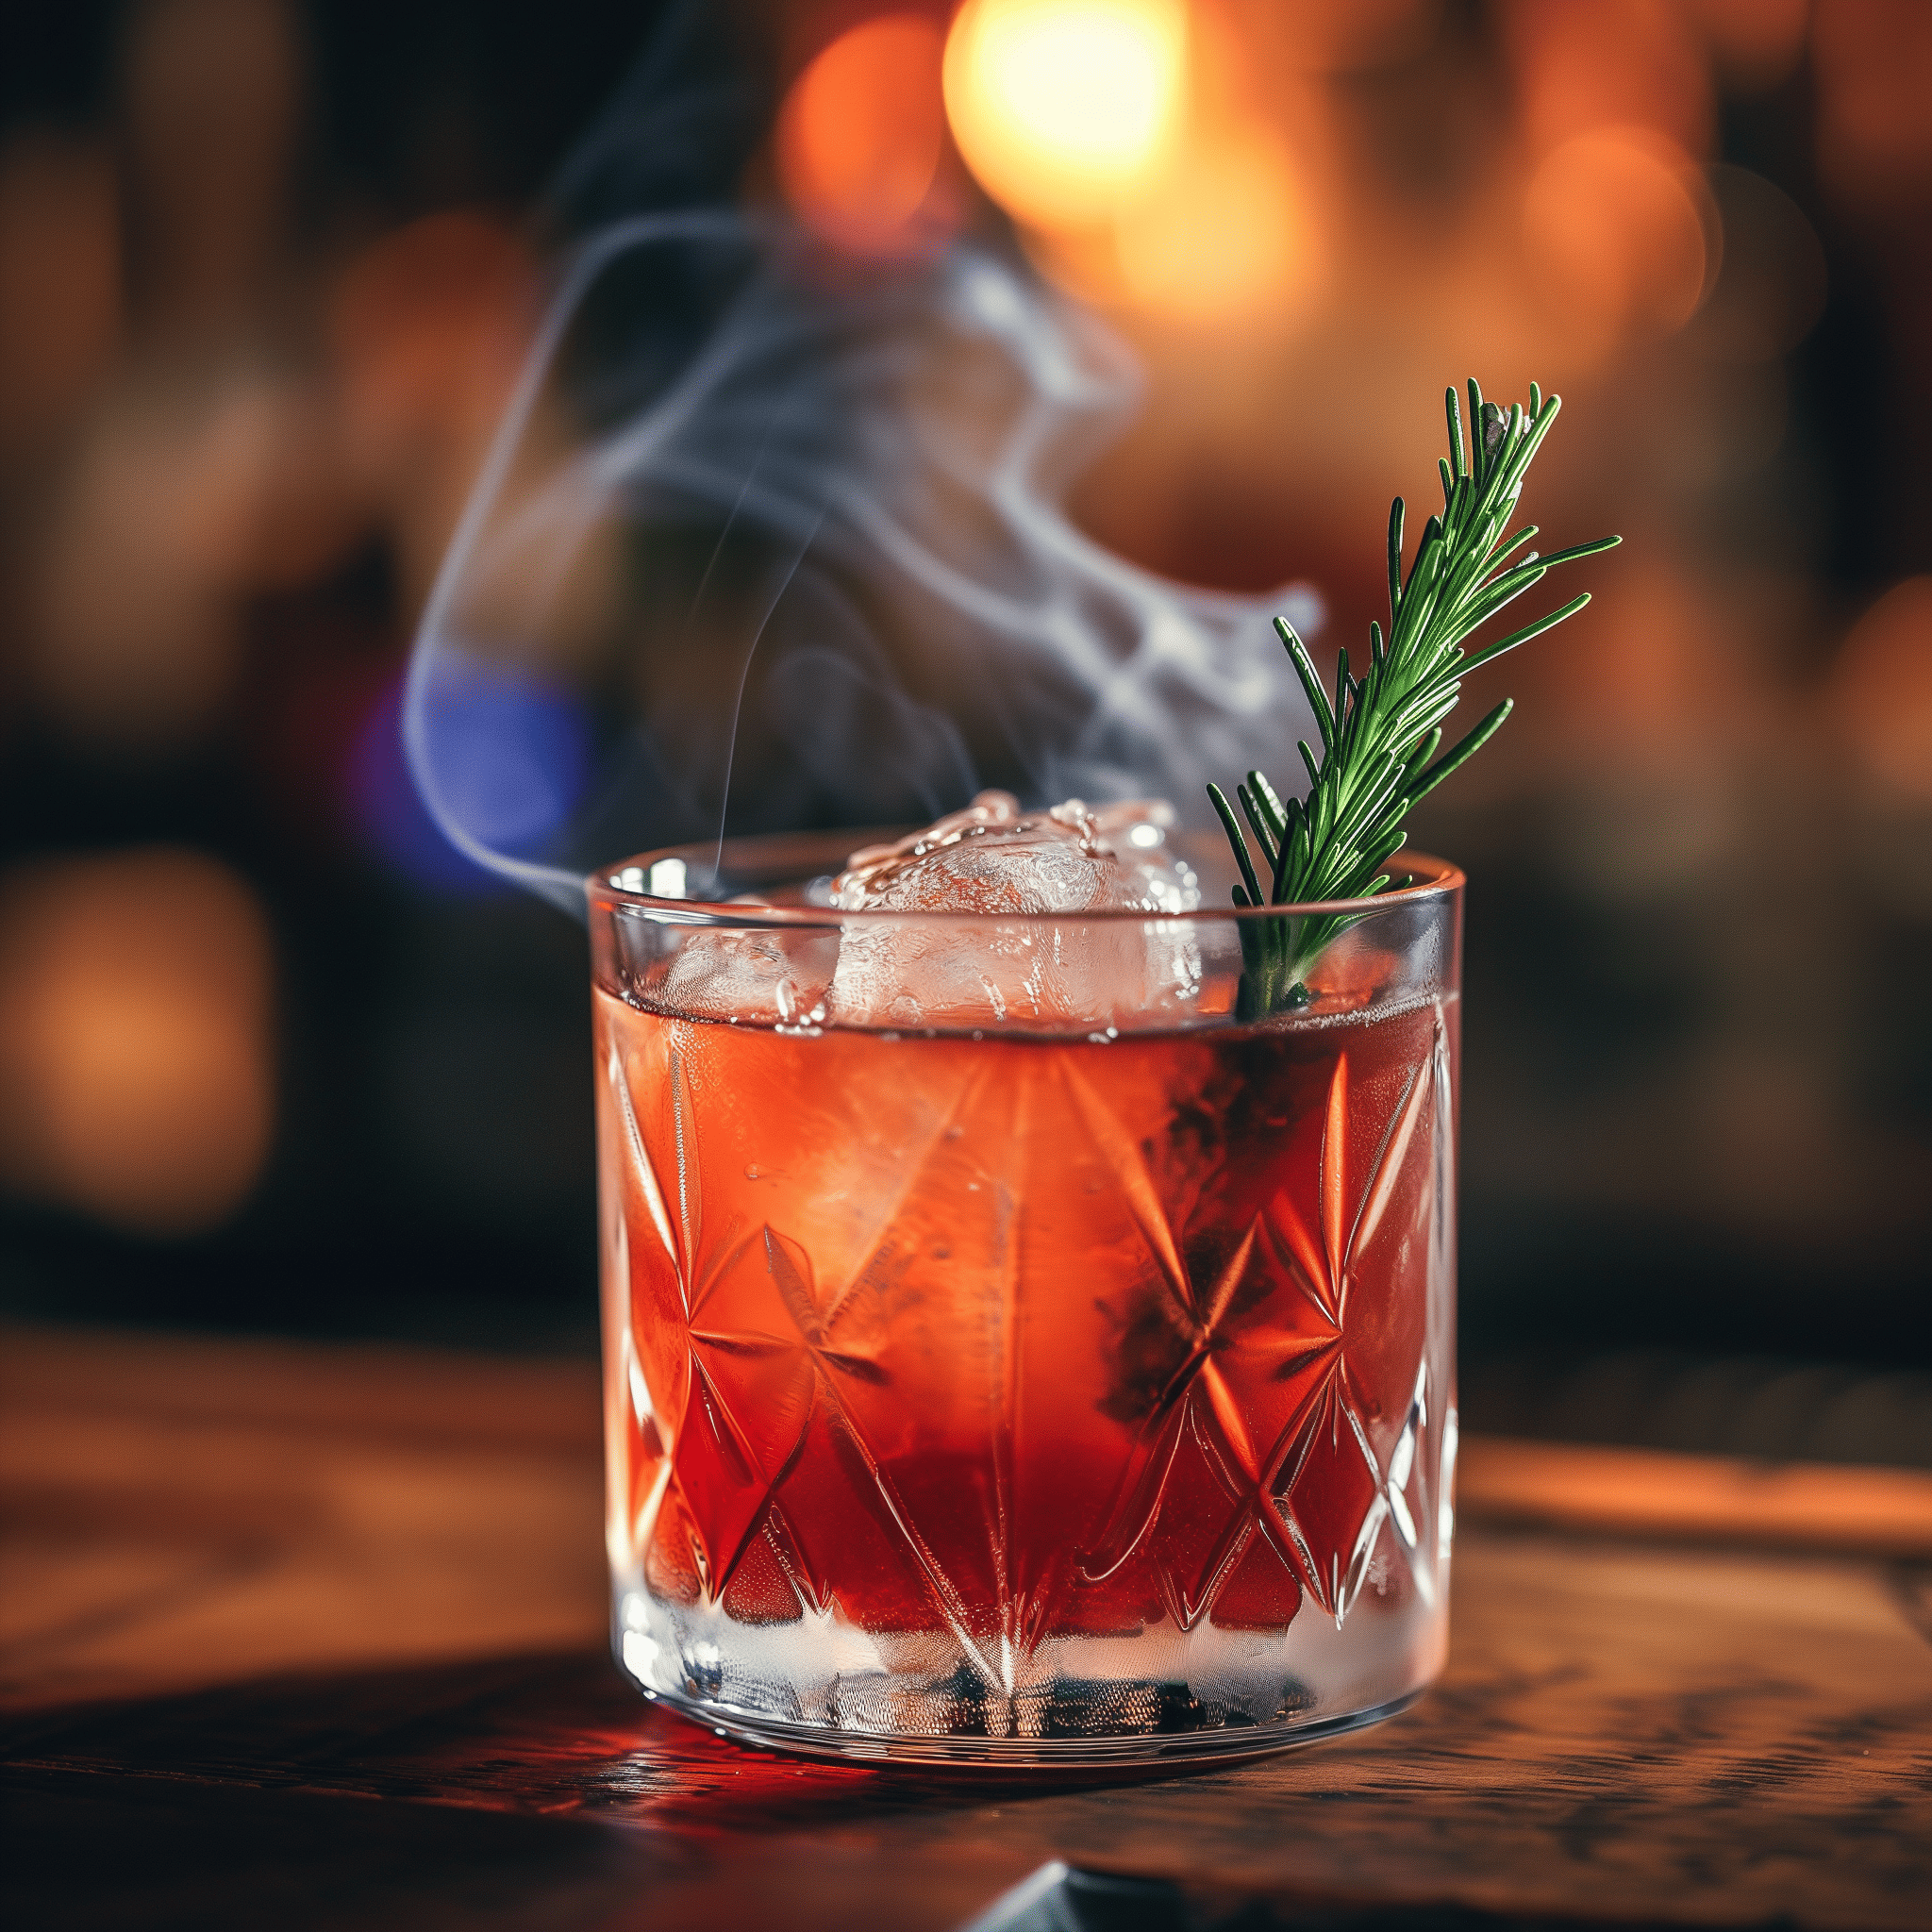 Smoke On The Water Cocktail Recipe - The 'Smoke On The Water' cocktail offers a complex flavor profile. It's smoky due to the mezcal, with a subtle sweetness from the watermelon juice and hibiscus syrup. The Cointreau provides a citrusy depth, while the lime juice adds a refreshing tartness. The flaming rosemary sprig infuses the drink with a herbaceous aroma, enhancing the overall sensory experience.